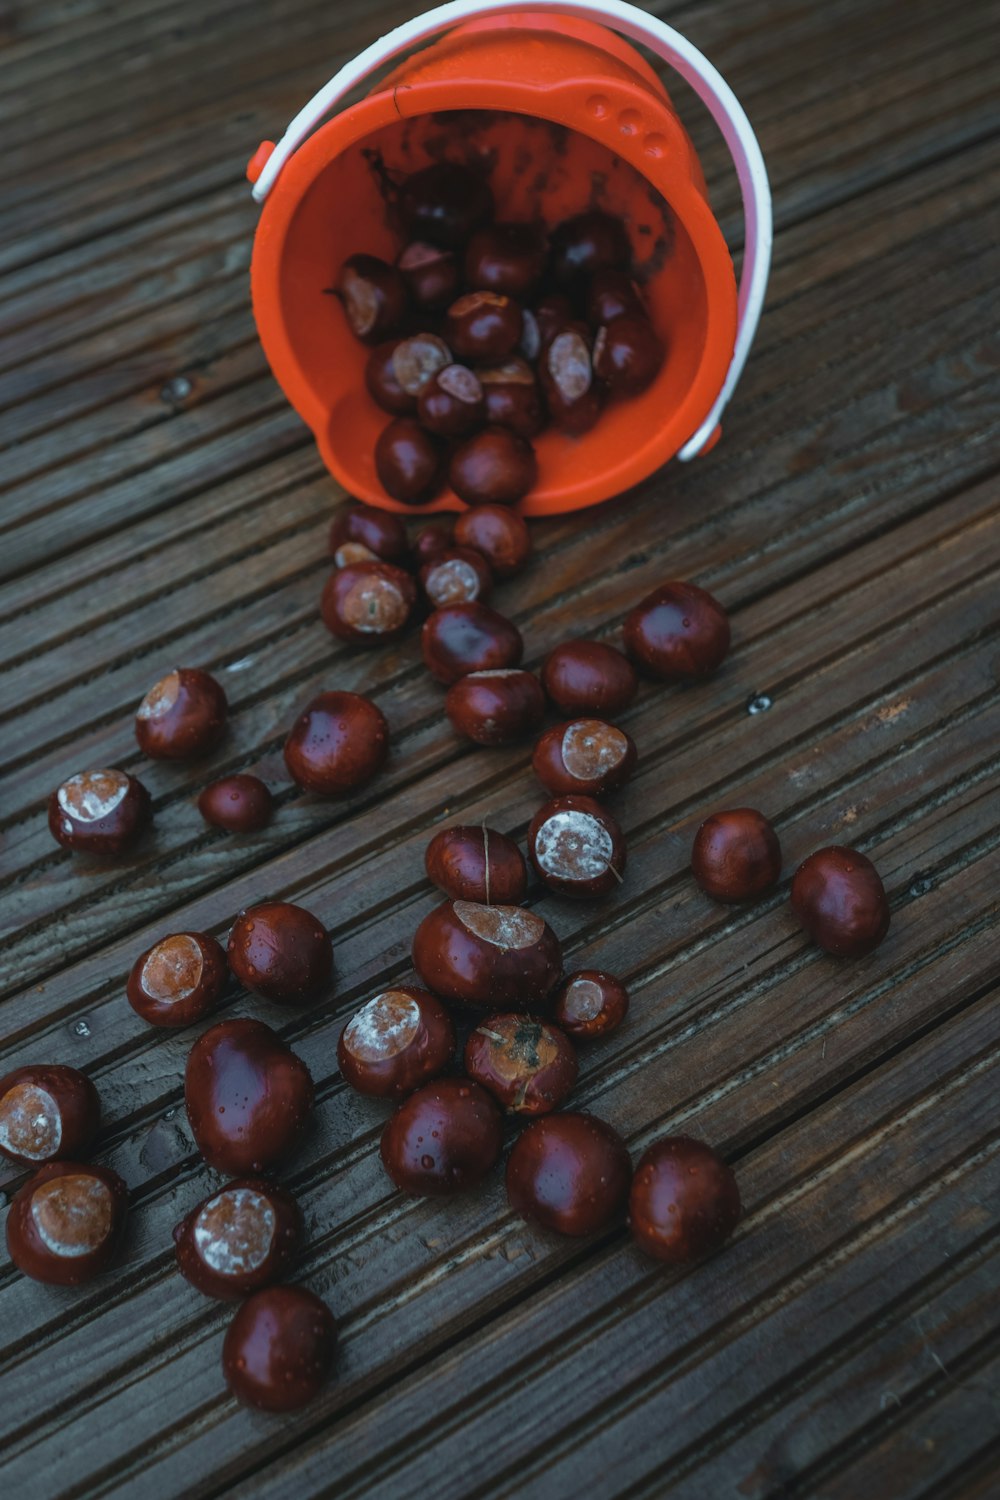 a bucket full of chestnuts on a wooden table